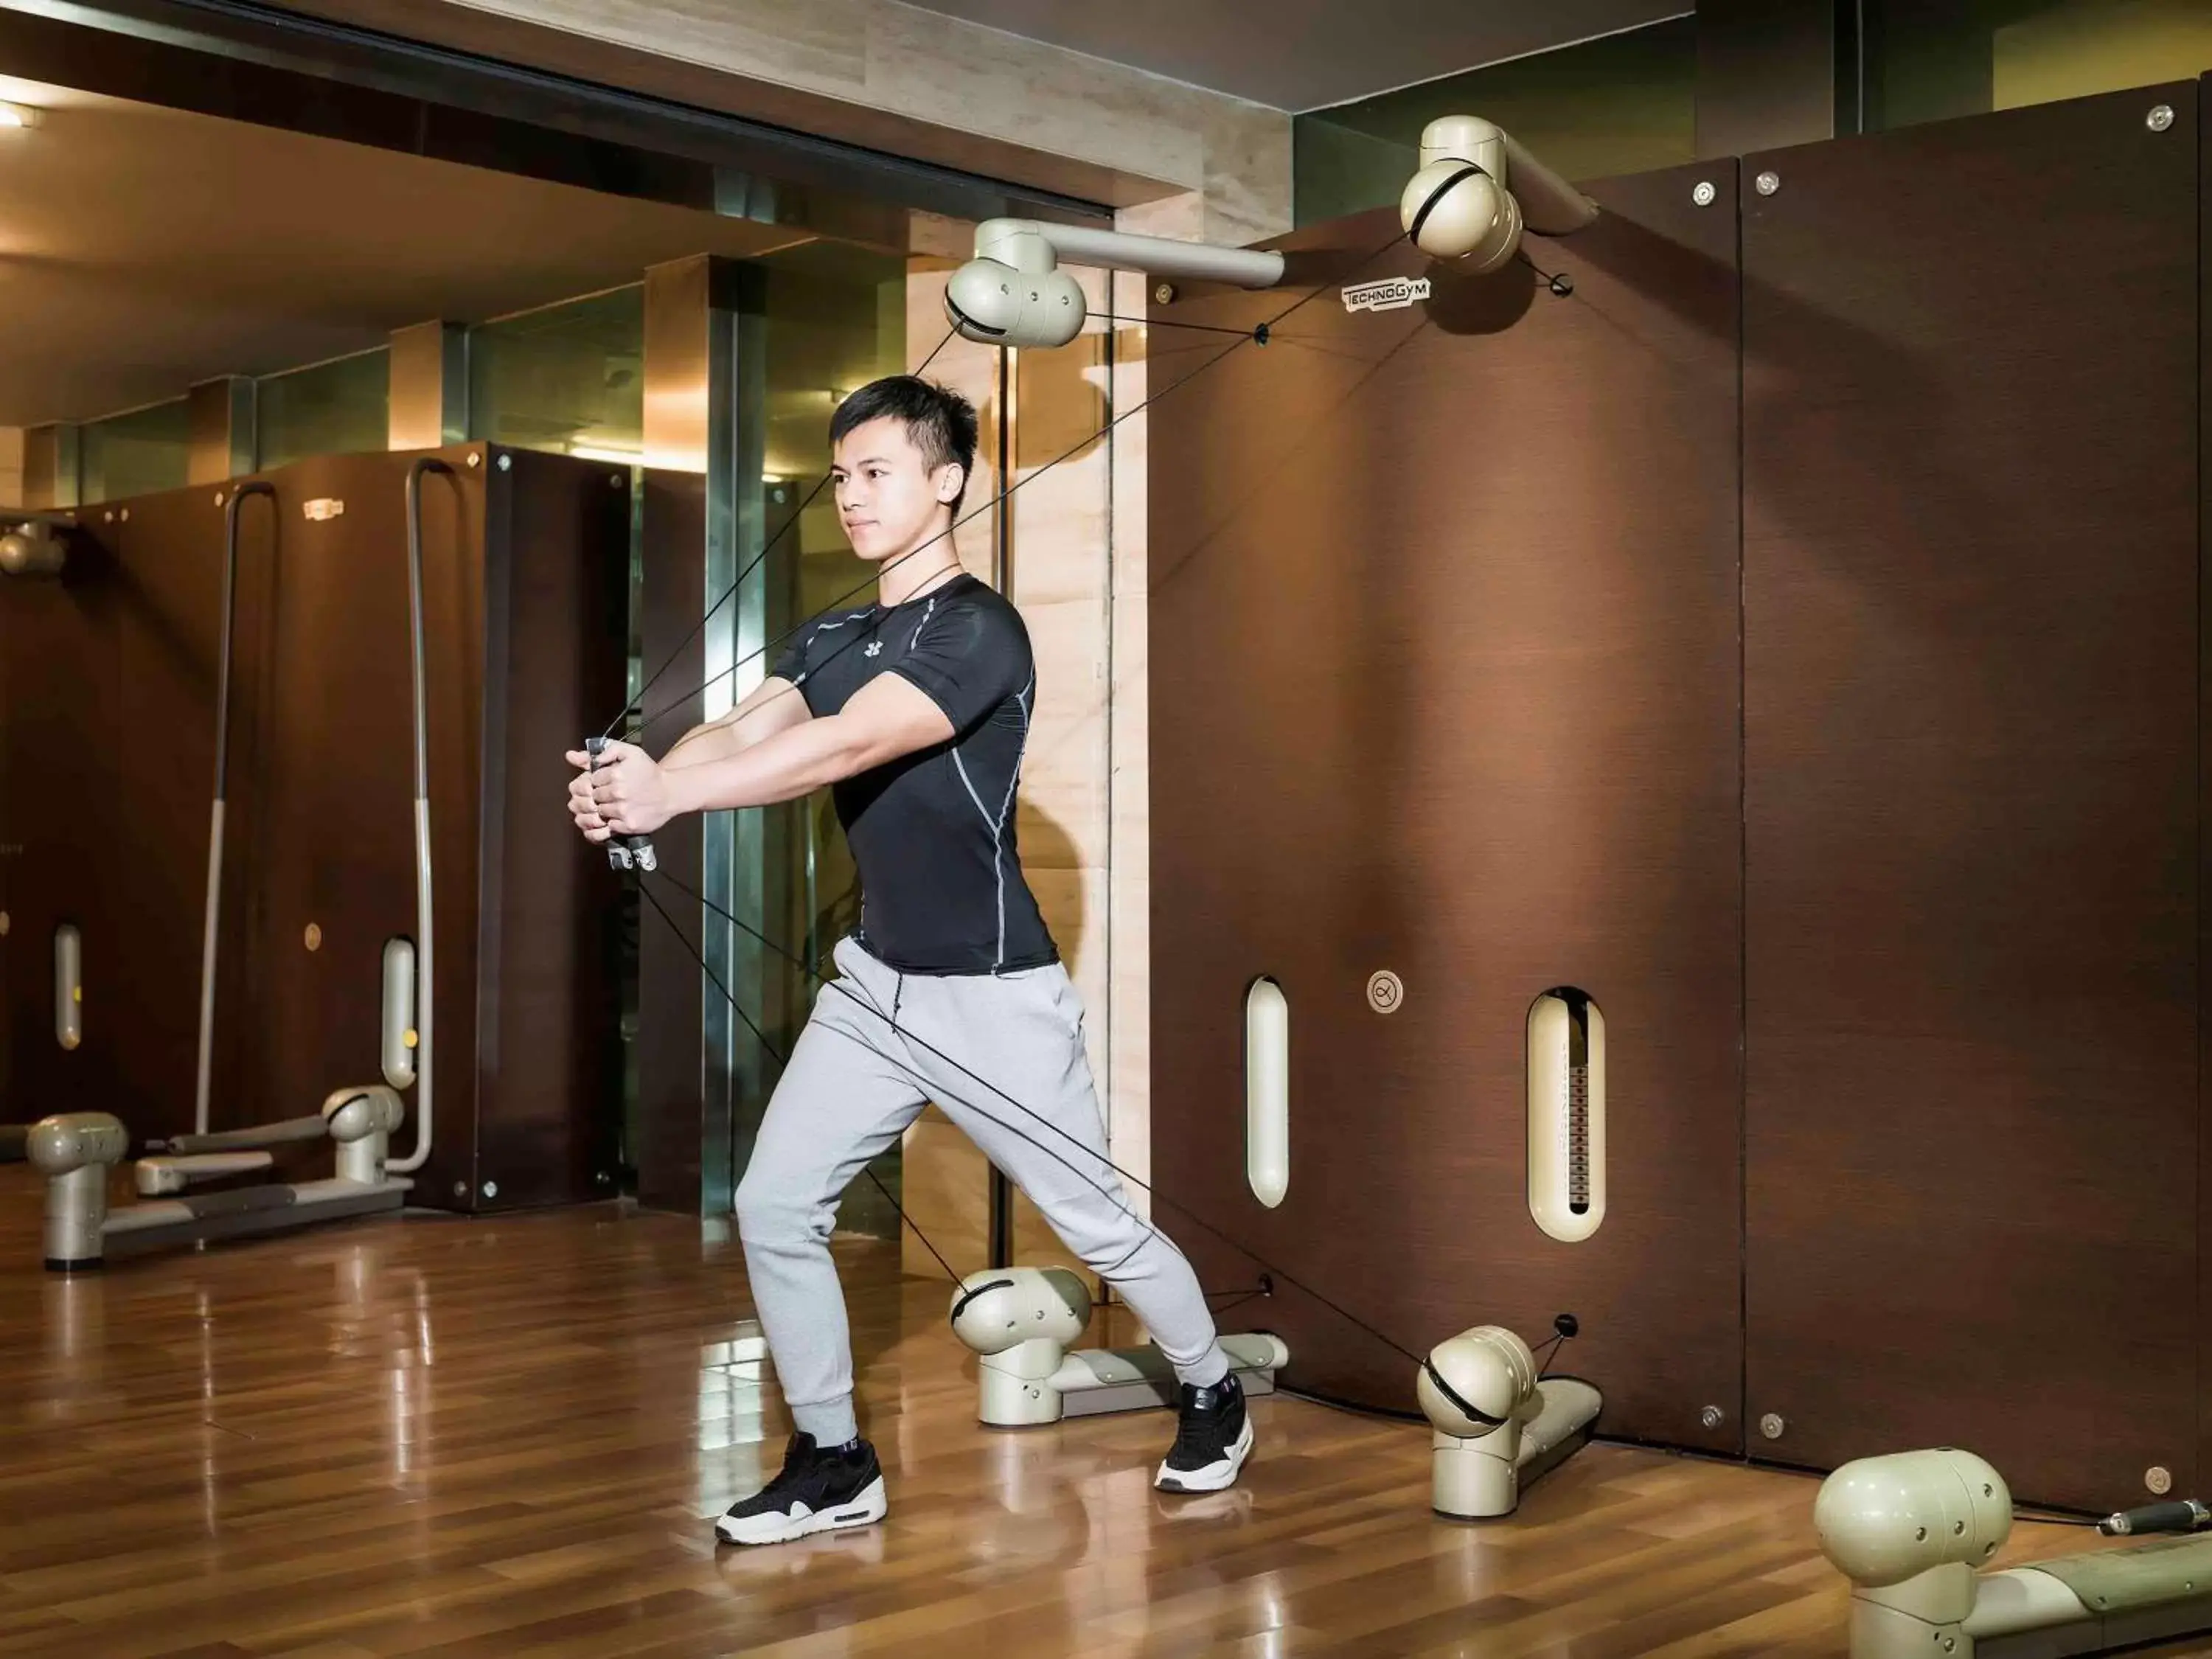 Fitness centre/facilities in Pullman Beijing South